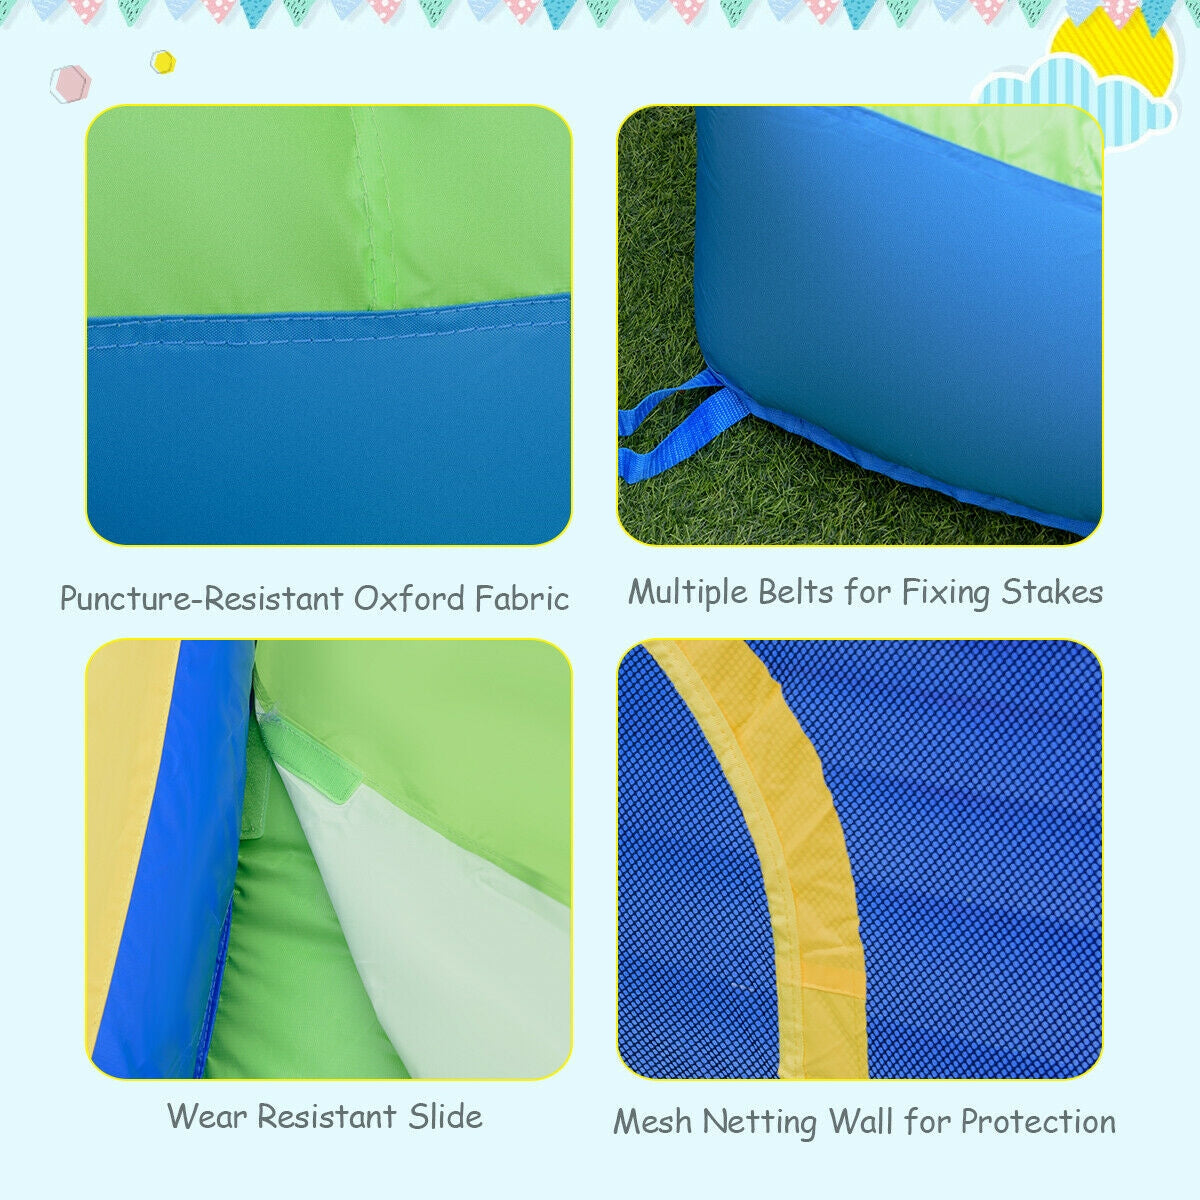 420D Oxford Fabric with PVC Coating: The inflatable bounce house is constructed with durable 420D Oxford fabric coated with PVC, providing excellent puncture resistance, strength, and toughness.